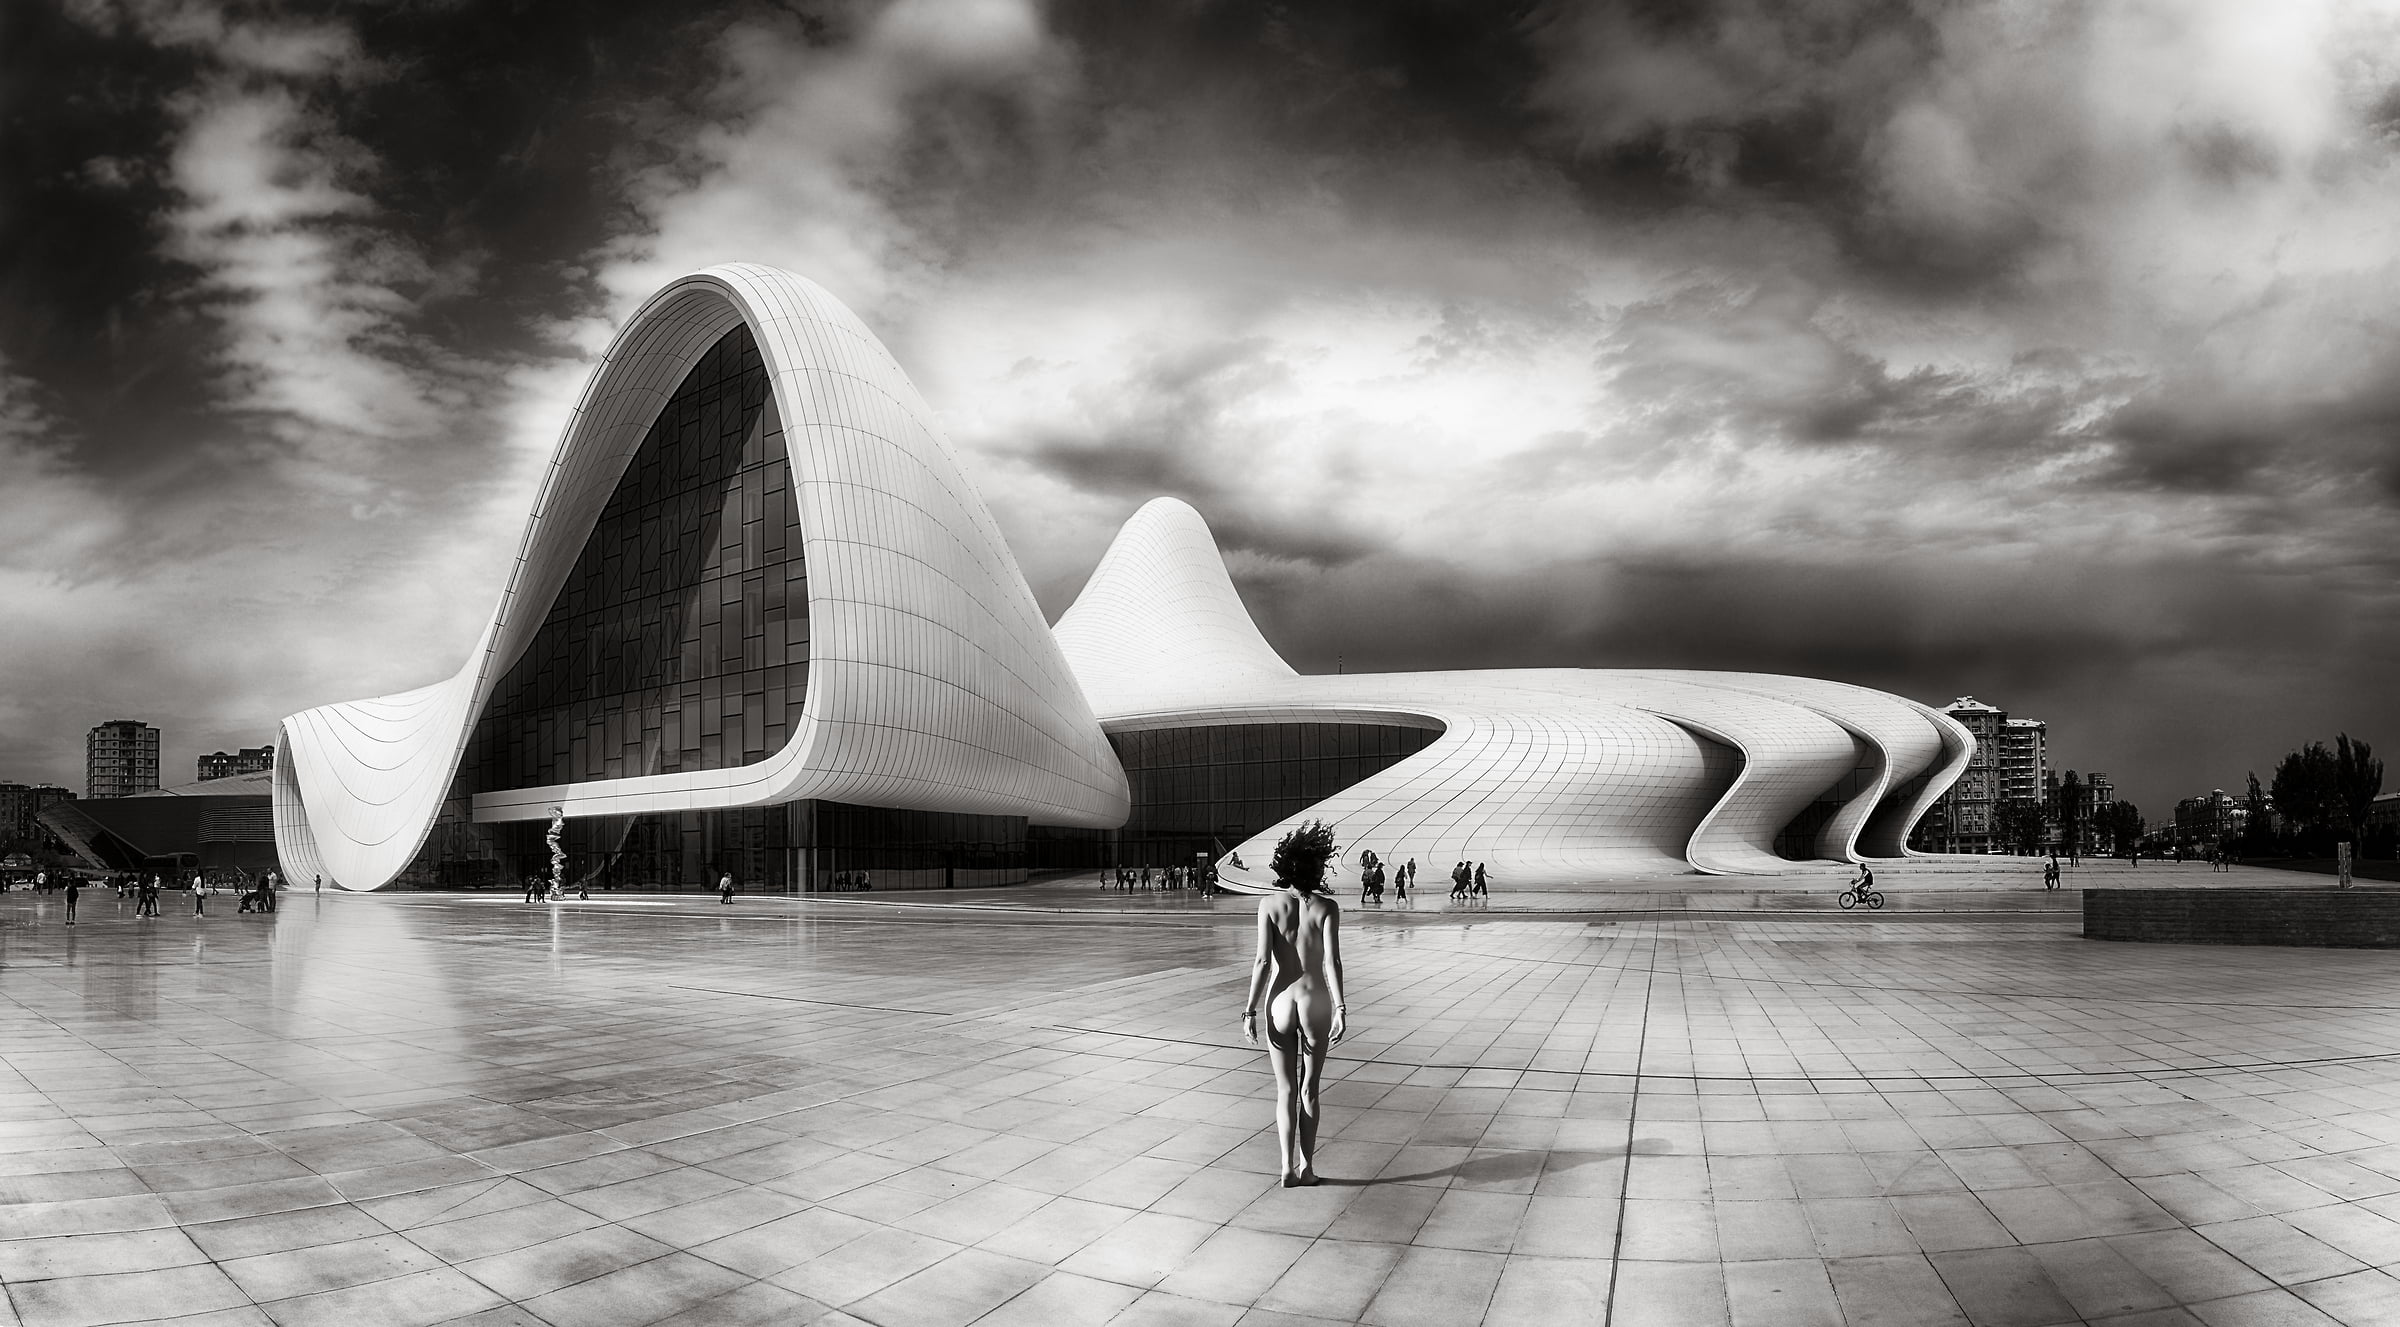 159 megapixels! A very high resolution, large-format VAST photo print of a nude woman in a plaza in front of a modern building; surreal, black & white nude photograph created by Peter Rodger in Heydar Aliyev Center, Baku, Azerbaijan.